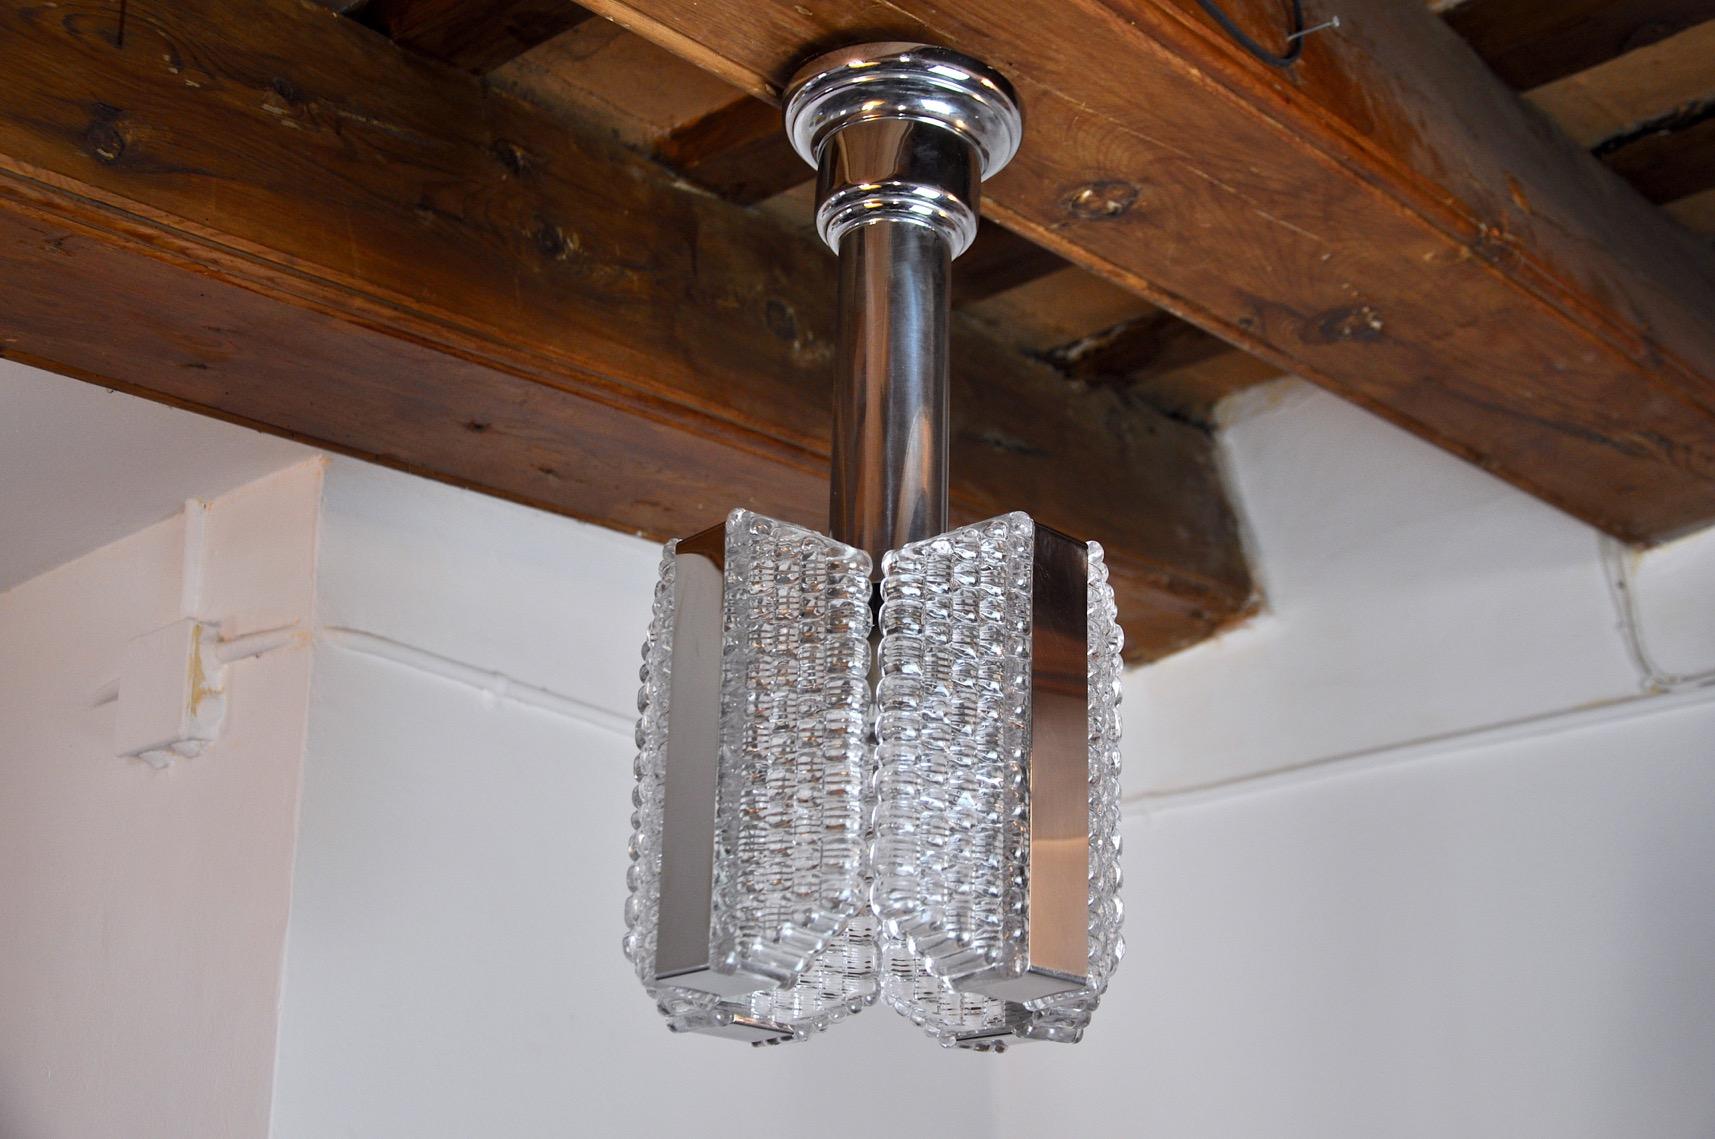 Very beautiful and rare Kaiser Leuchten chandelier designated and produced in Germany in the 1960s. Chromed metal chandelier composed of textured crystals. Rare design object that will illuminate your interior wonderfully. Electricity checked, state